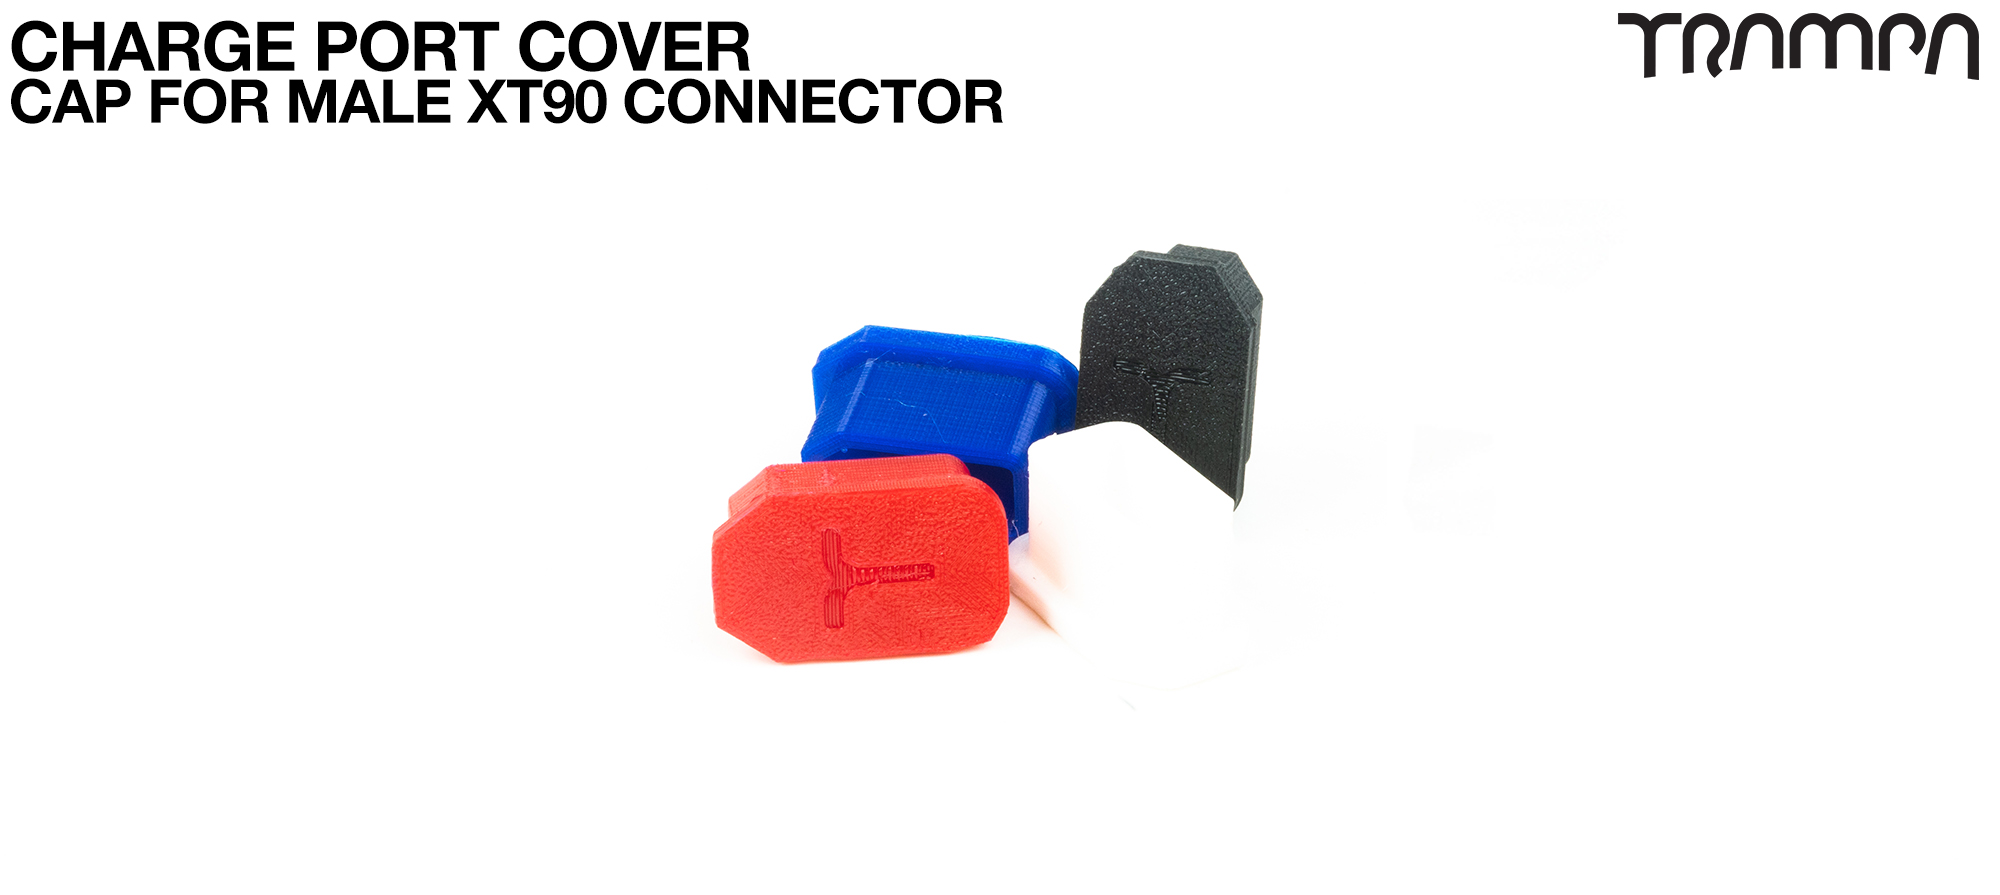 Charge Port Cover - CAP for Male XT90 Connector 